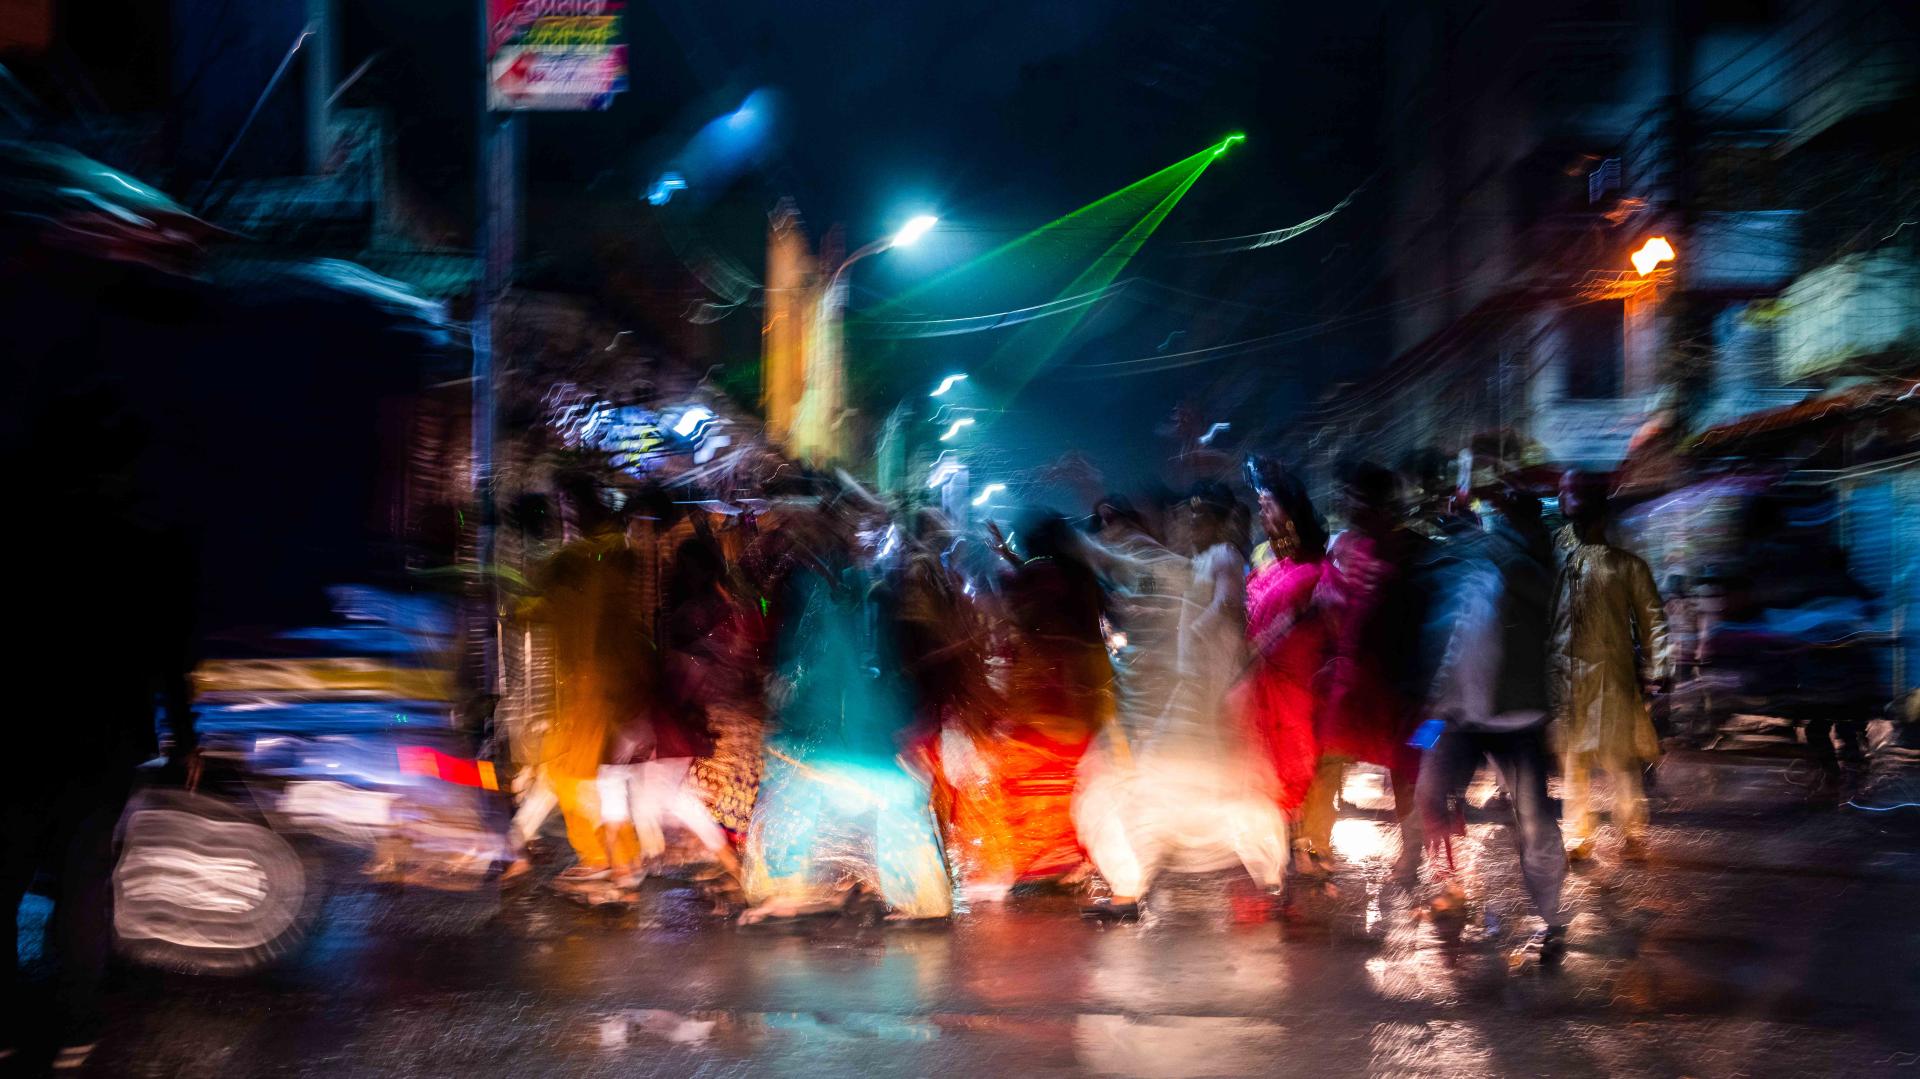 European Photography Awards Winner - Colors in Motion